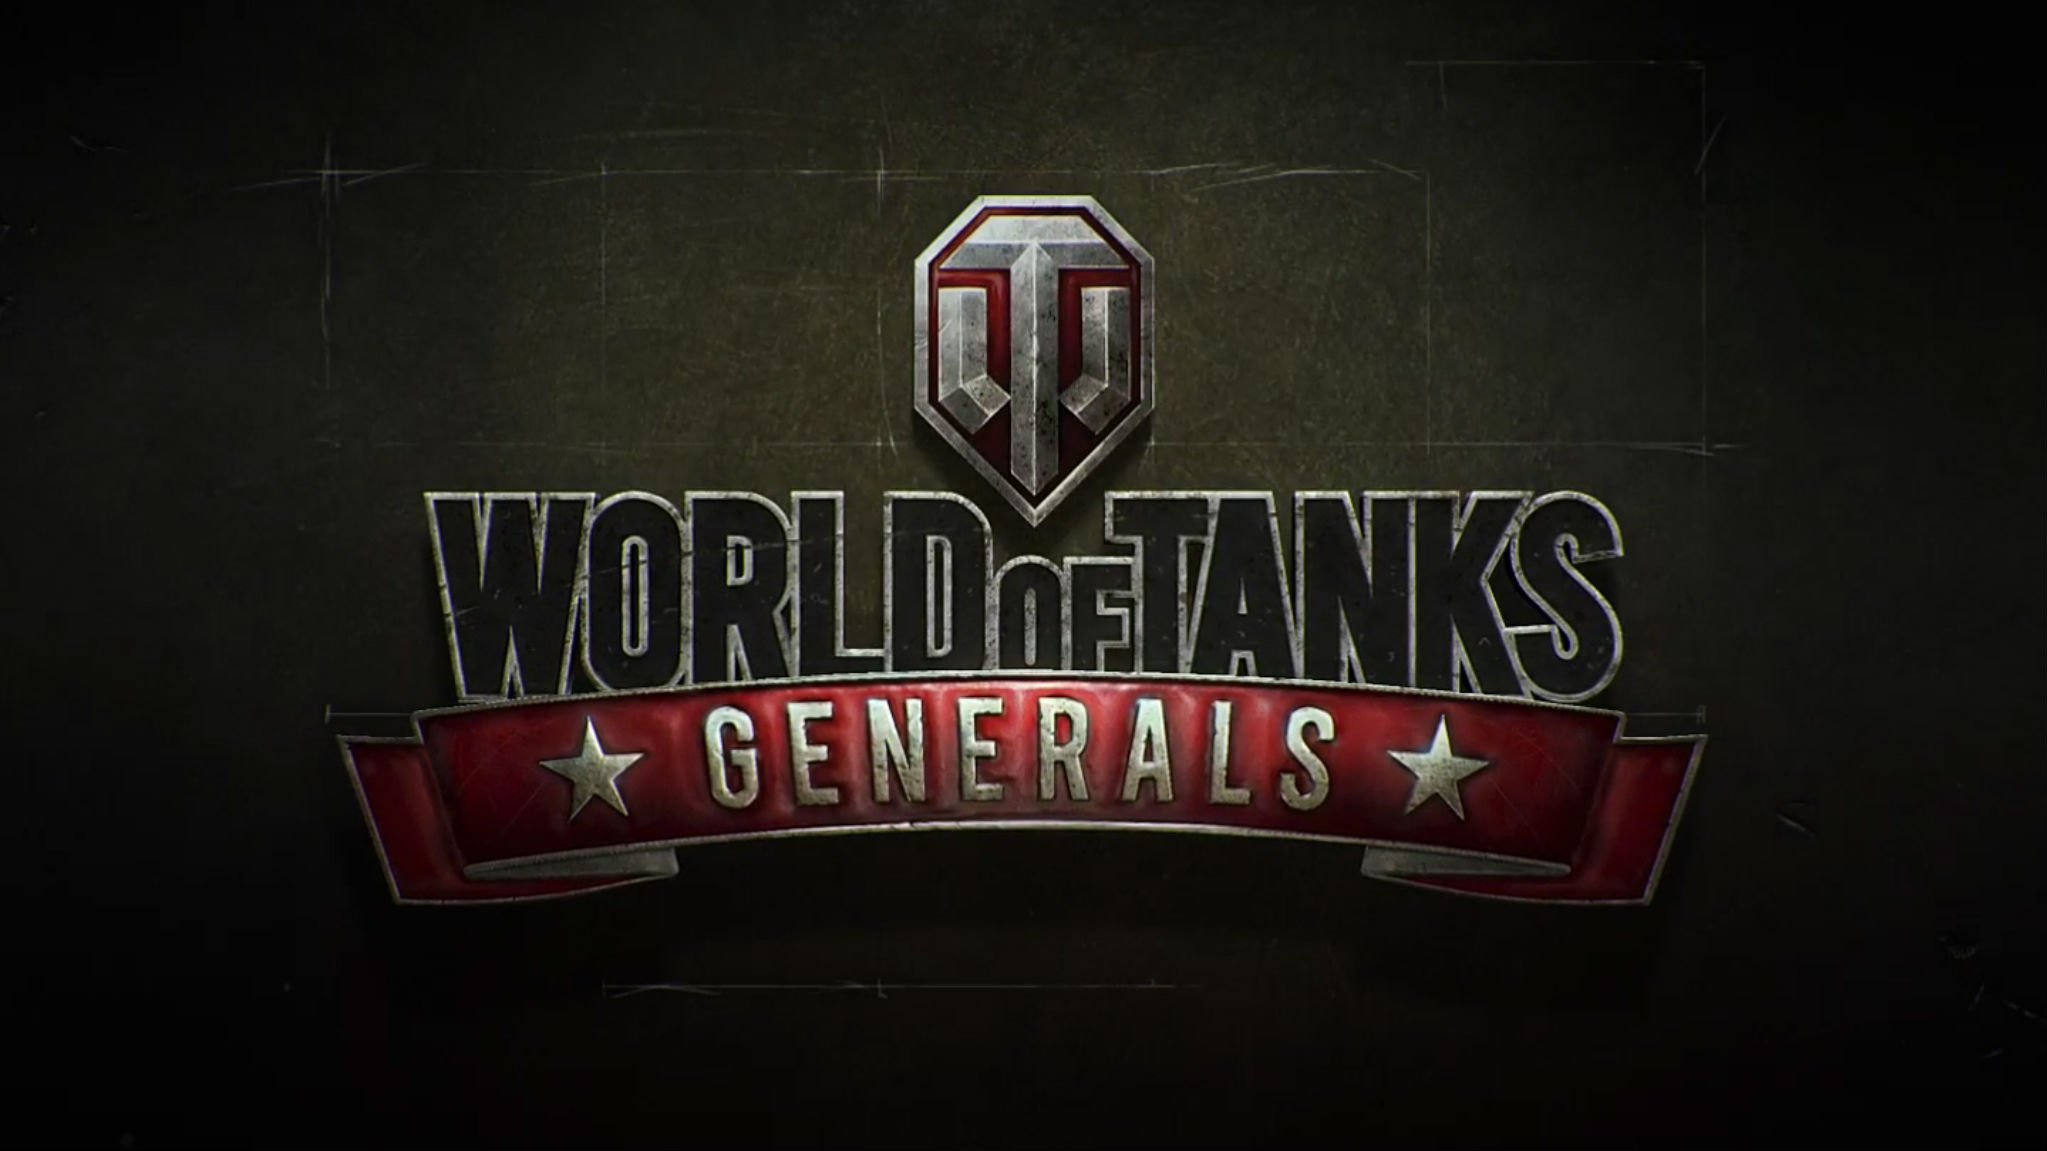 We’re Playing World of Tanks Generals, and Our First Impressions Are Good